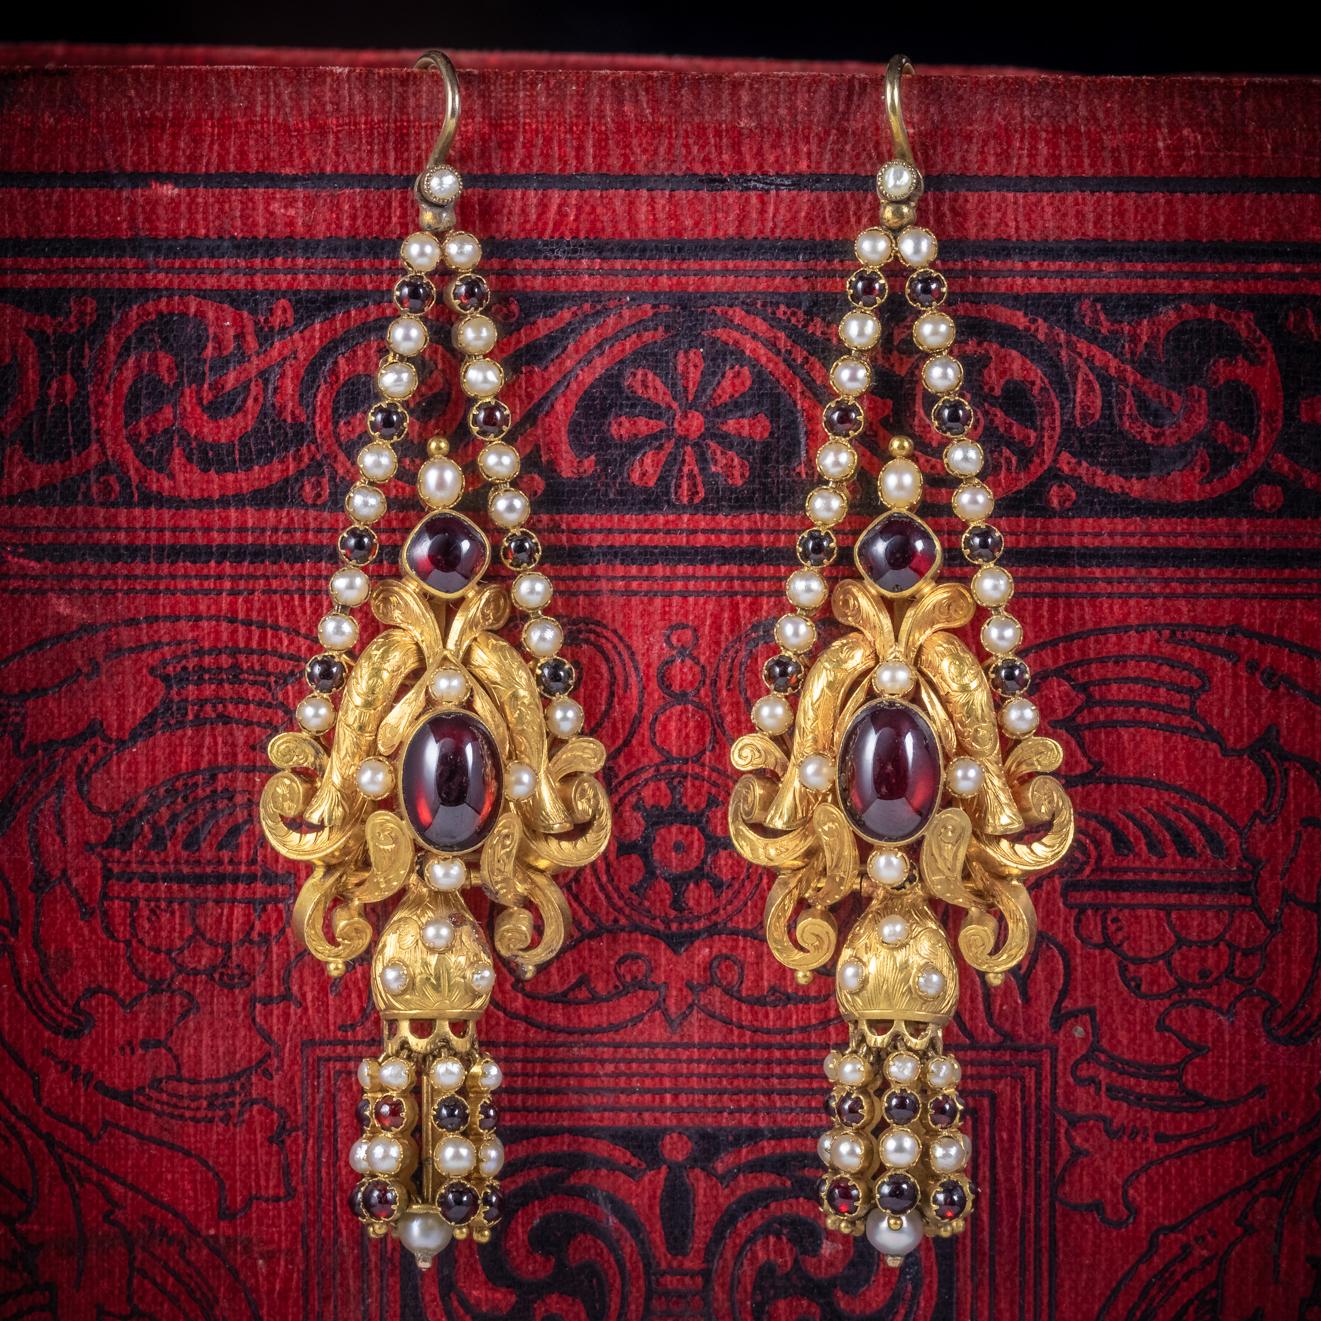 A spectacular pair of antique Georgian drop earrings C. 1800 adorned with deep red Garnet’s and lovely natural Pearls. 

Each earring is lined with Garnet’s and Pearls leading to a fabulous engraved gallery crowned with a larger Cabochon Garnet and